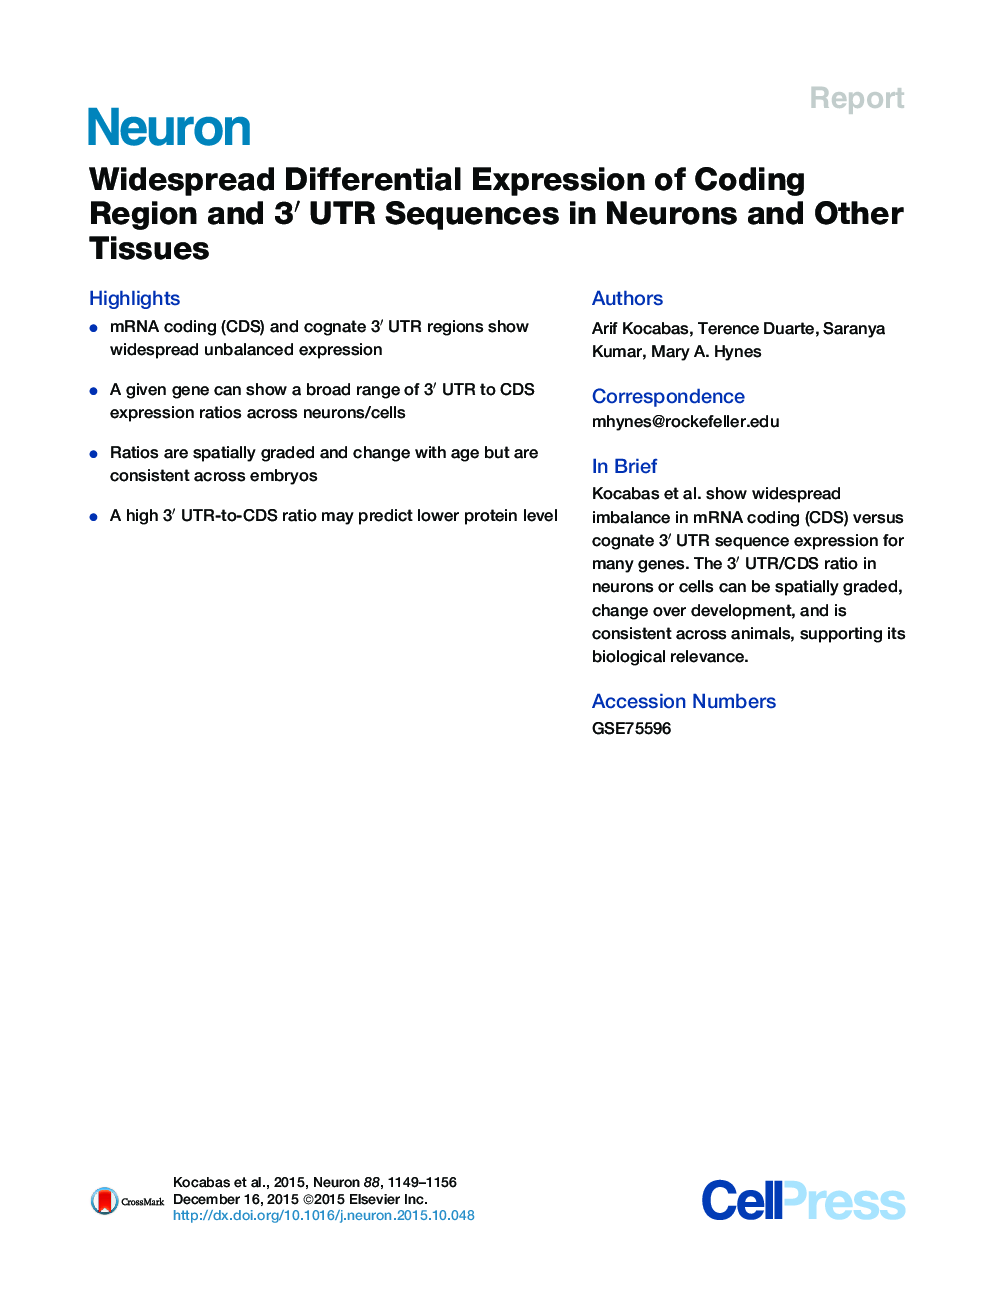 Widespread Differential Expression of Coding Region and 3′ UTR Sequences in Neurons and Other Tissues